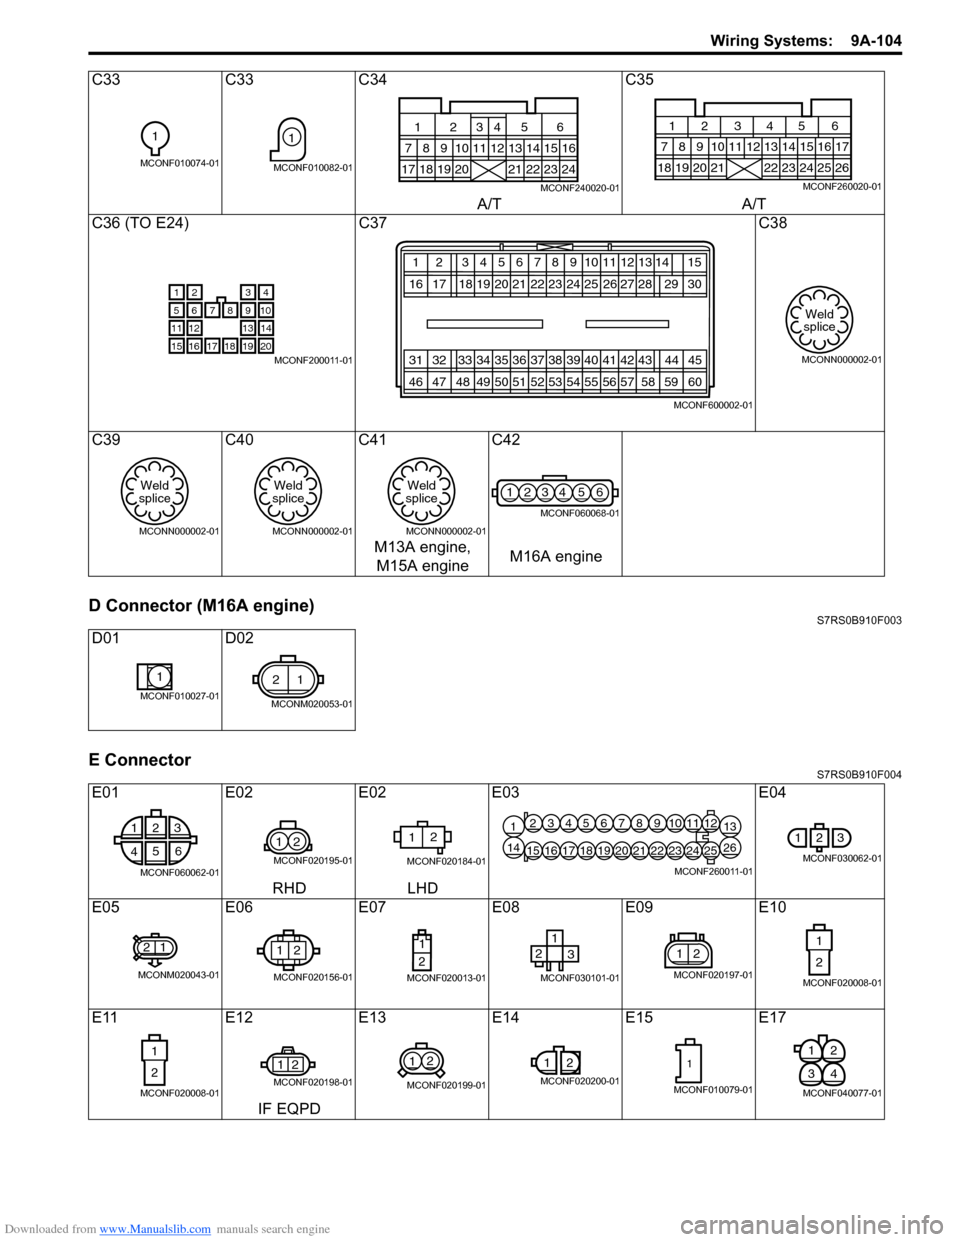 SUZUKI SWIFT 2008 2.G Service Workshop Manual Downloaded from www.Manualslib.com manuals search engine Wiring Systems:  9A-104
D Connector (M16A engine)S7RS0B910F003
E ConnectorS7RS0B910F004
C33C33C34 C35
A/T A/T
C36 (TO E24) C37 C38
C39 C40C41 C